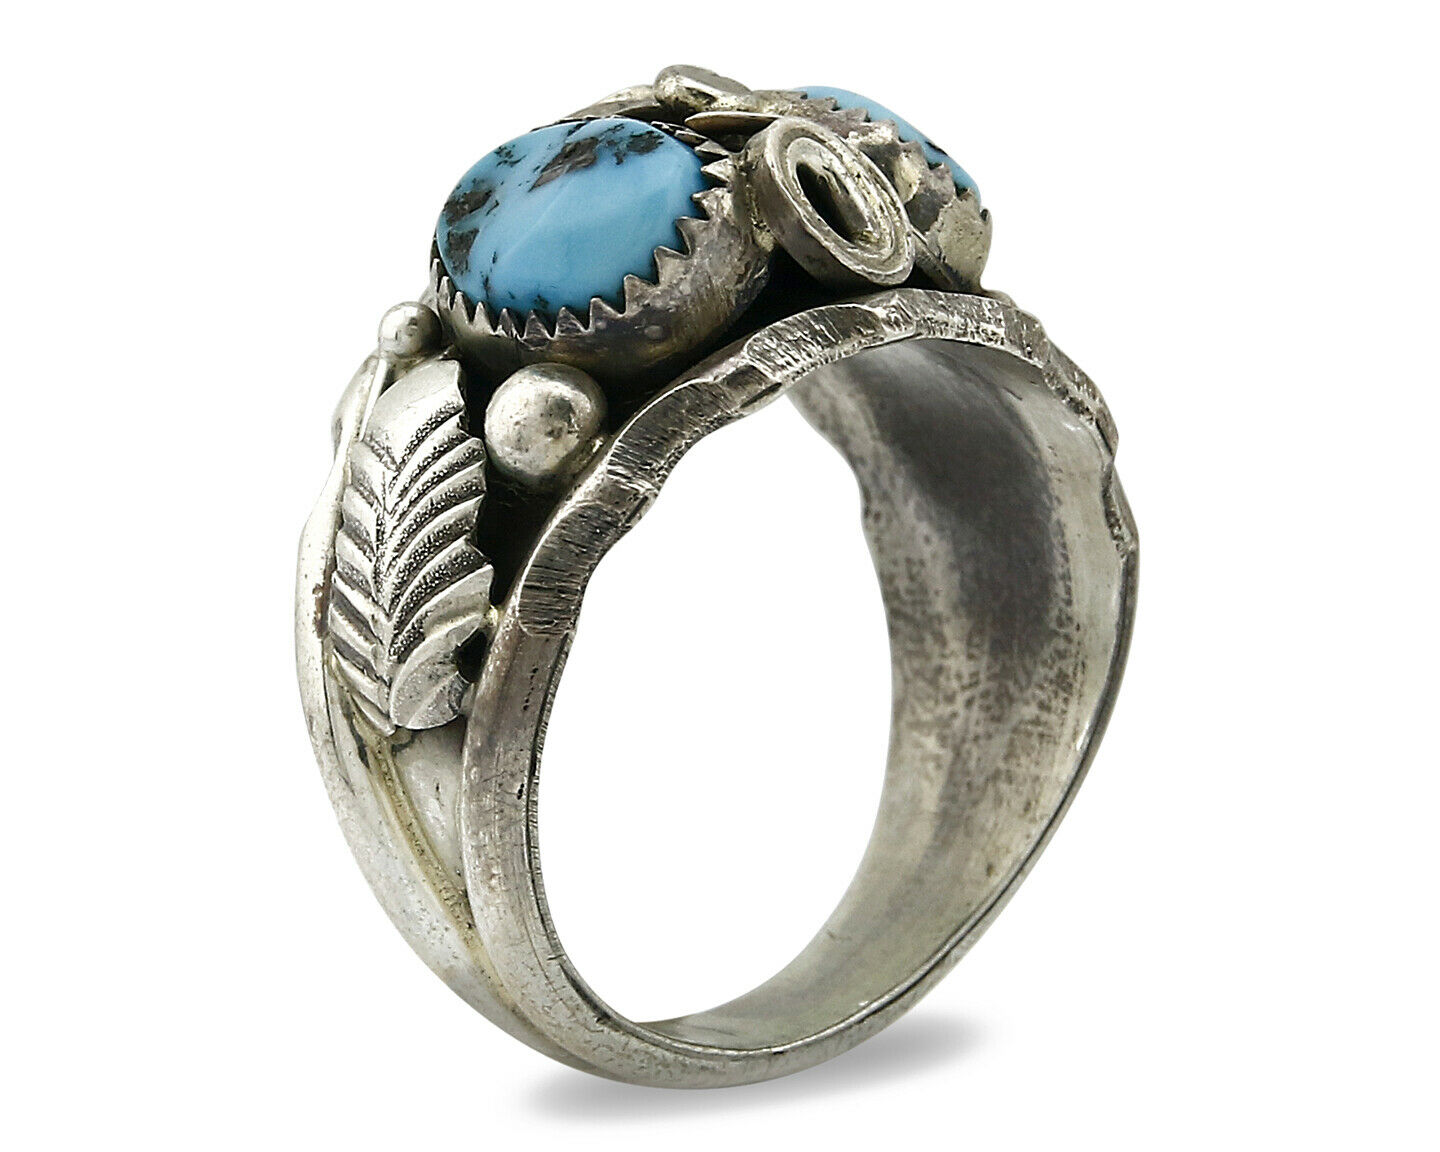 Zuni Ring .925 SOLID Silver Sleeping Beauty Turquoise Max Calabaza C.1980's